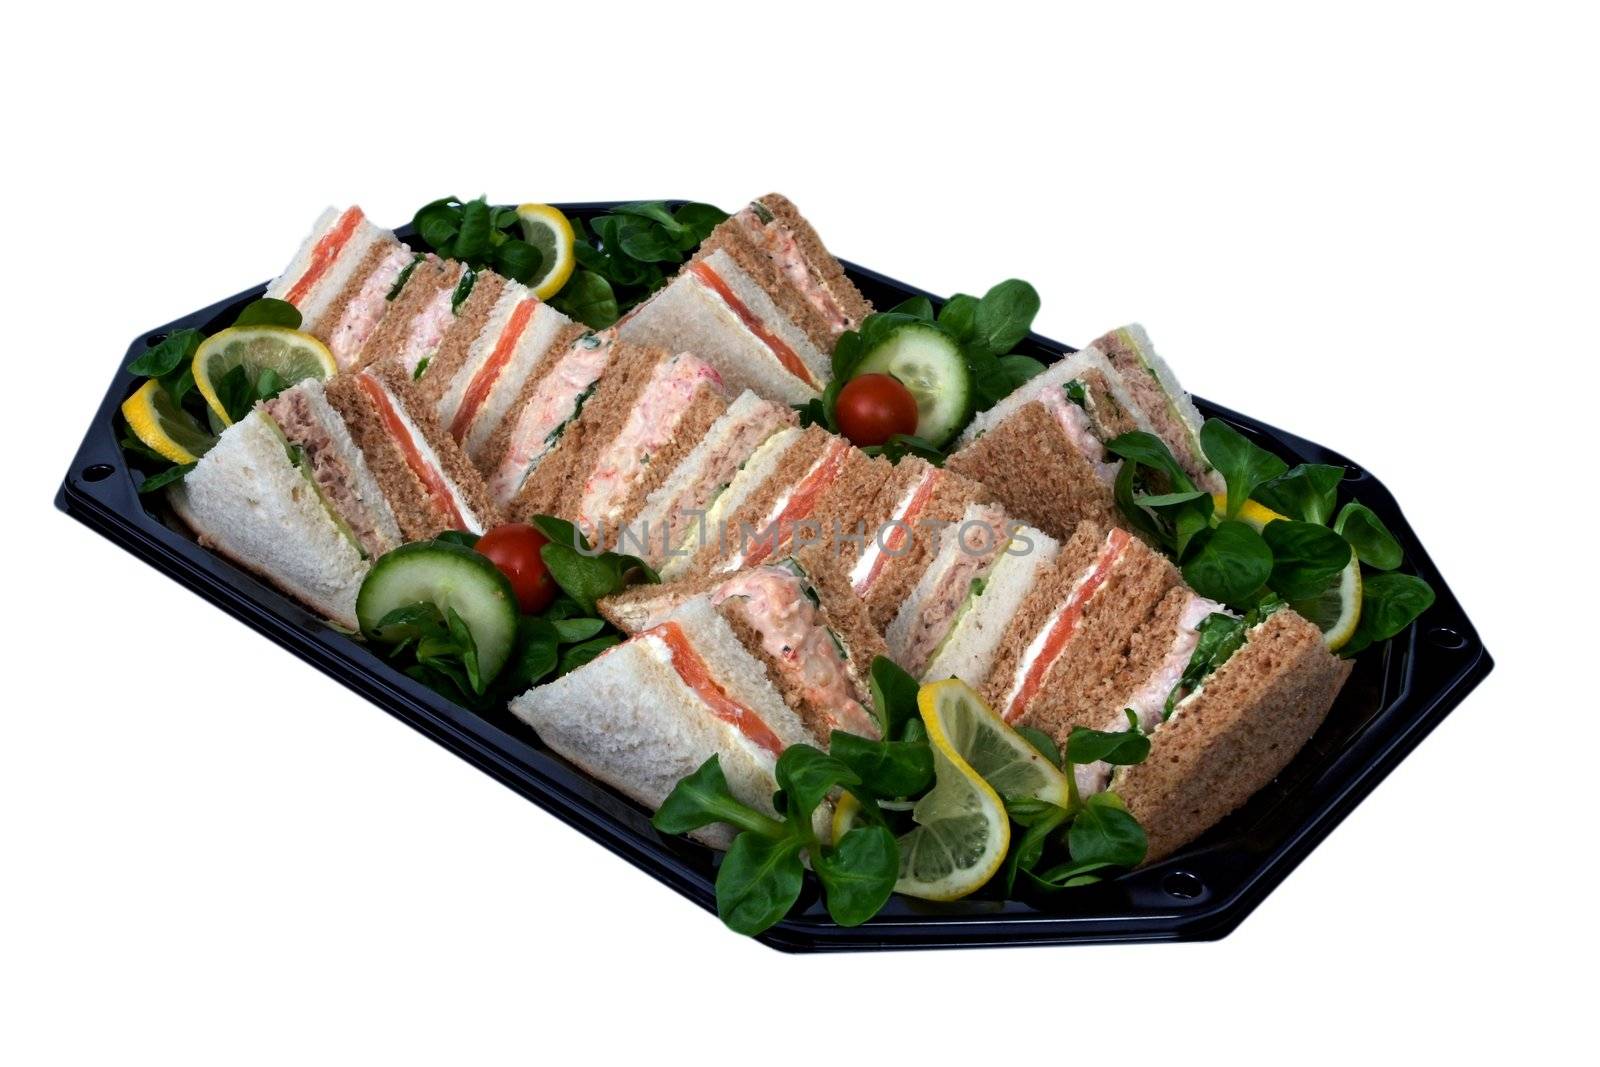 Platter of sandwiches cut into triangles, prepared on a tray for a business lunch